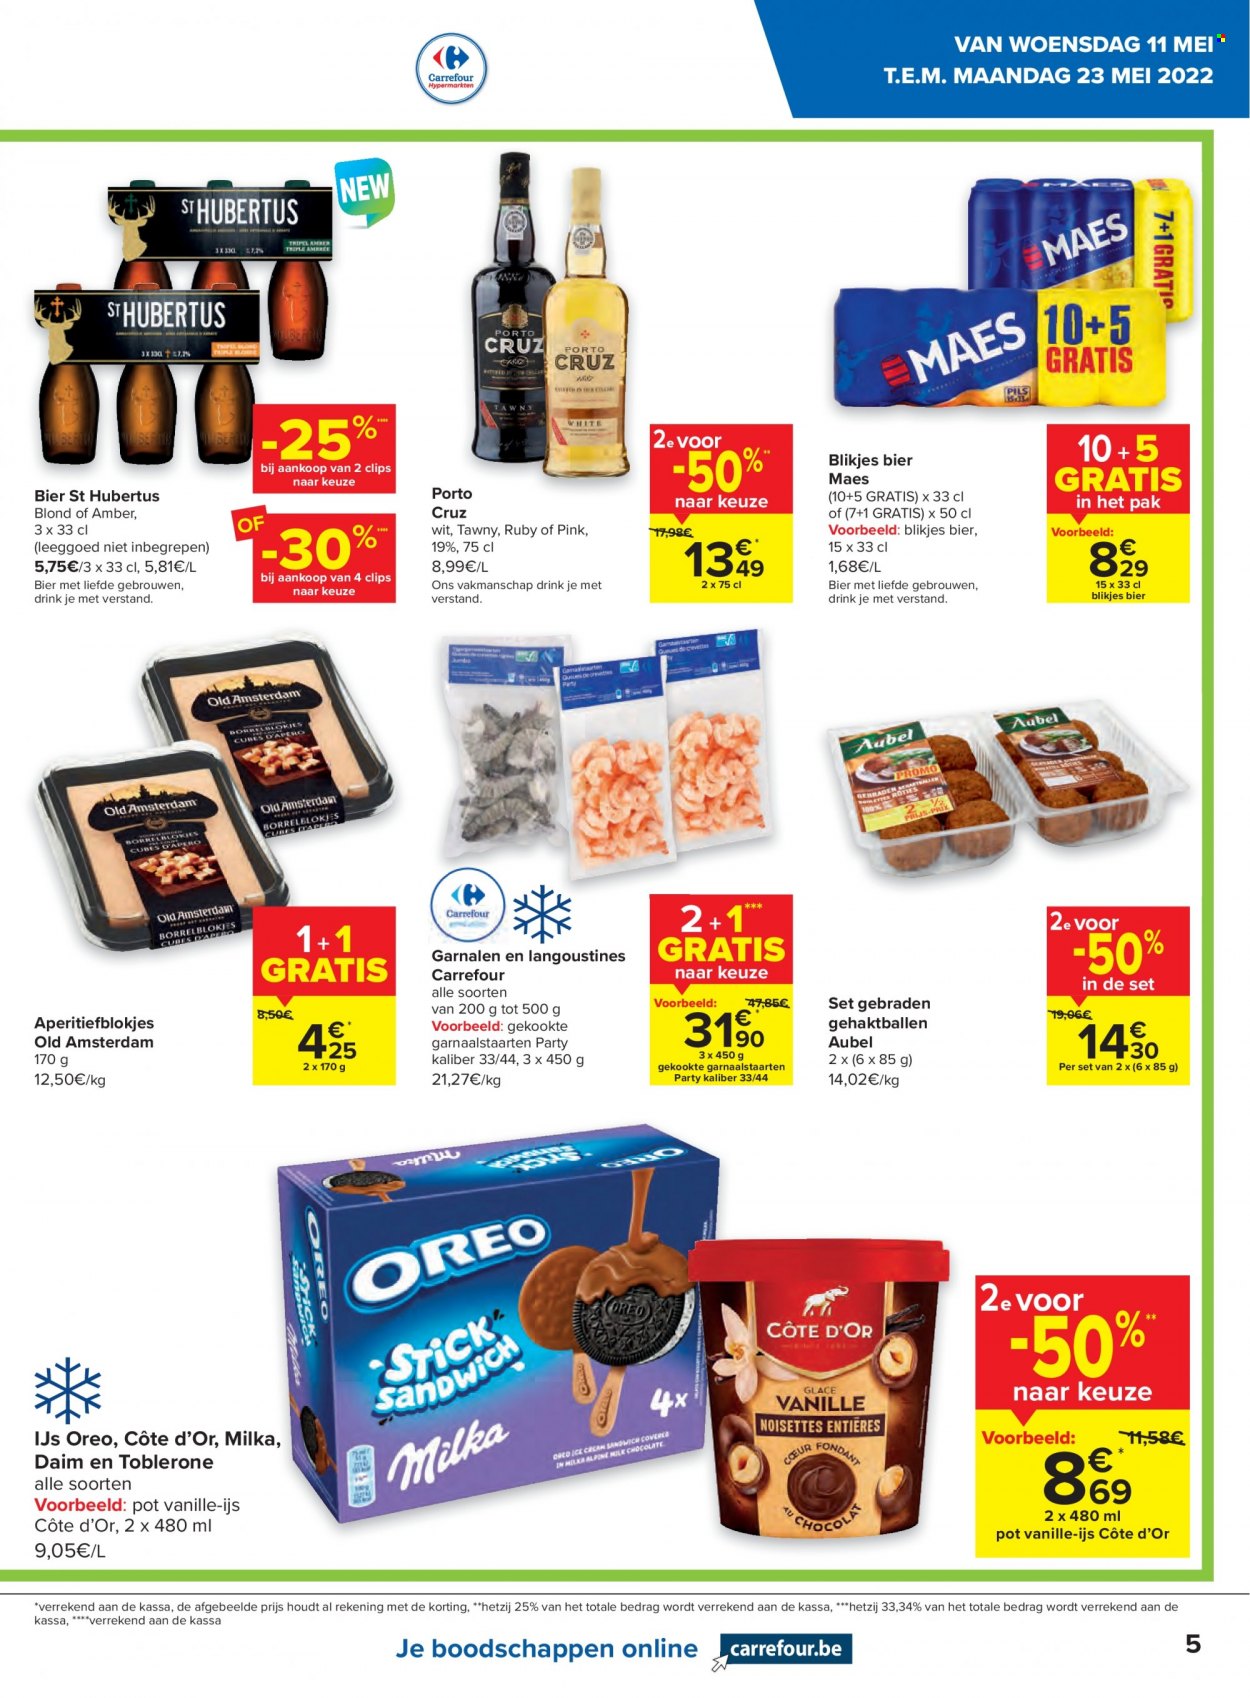 Catalogue Carrefour hypermarkt - 11.5.2022 - 23.5.2022. Page 5.